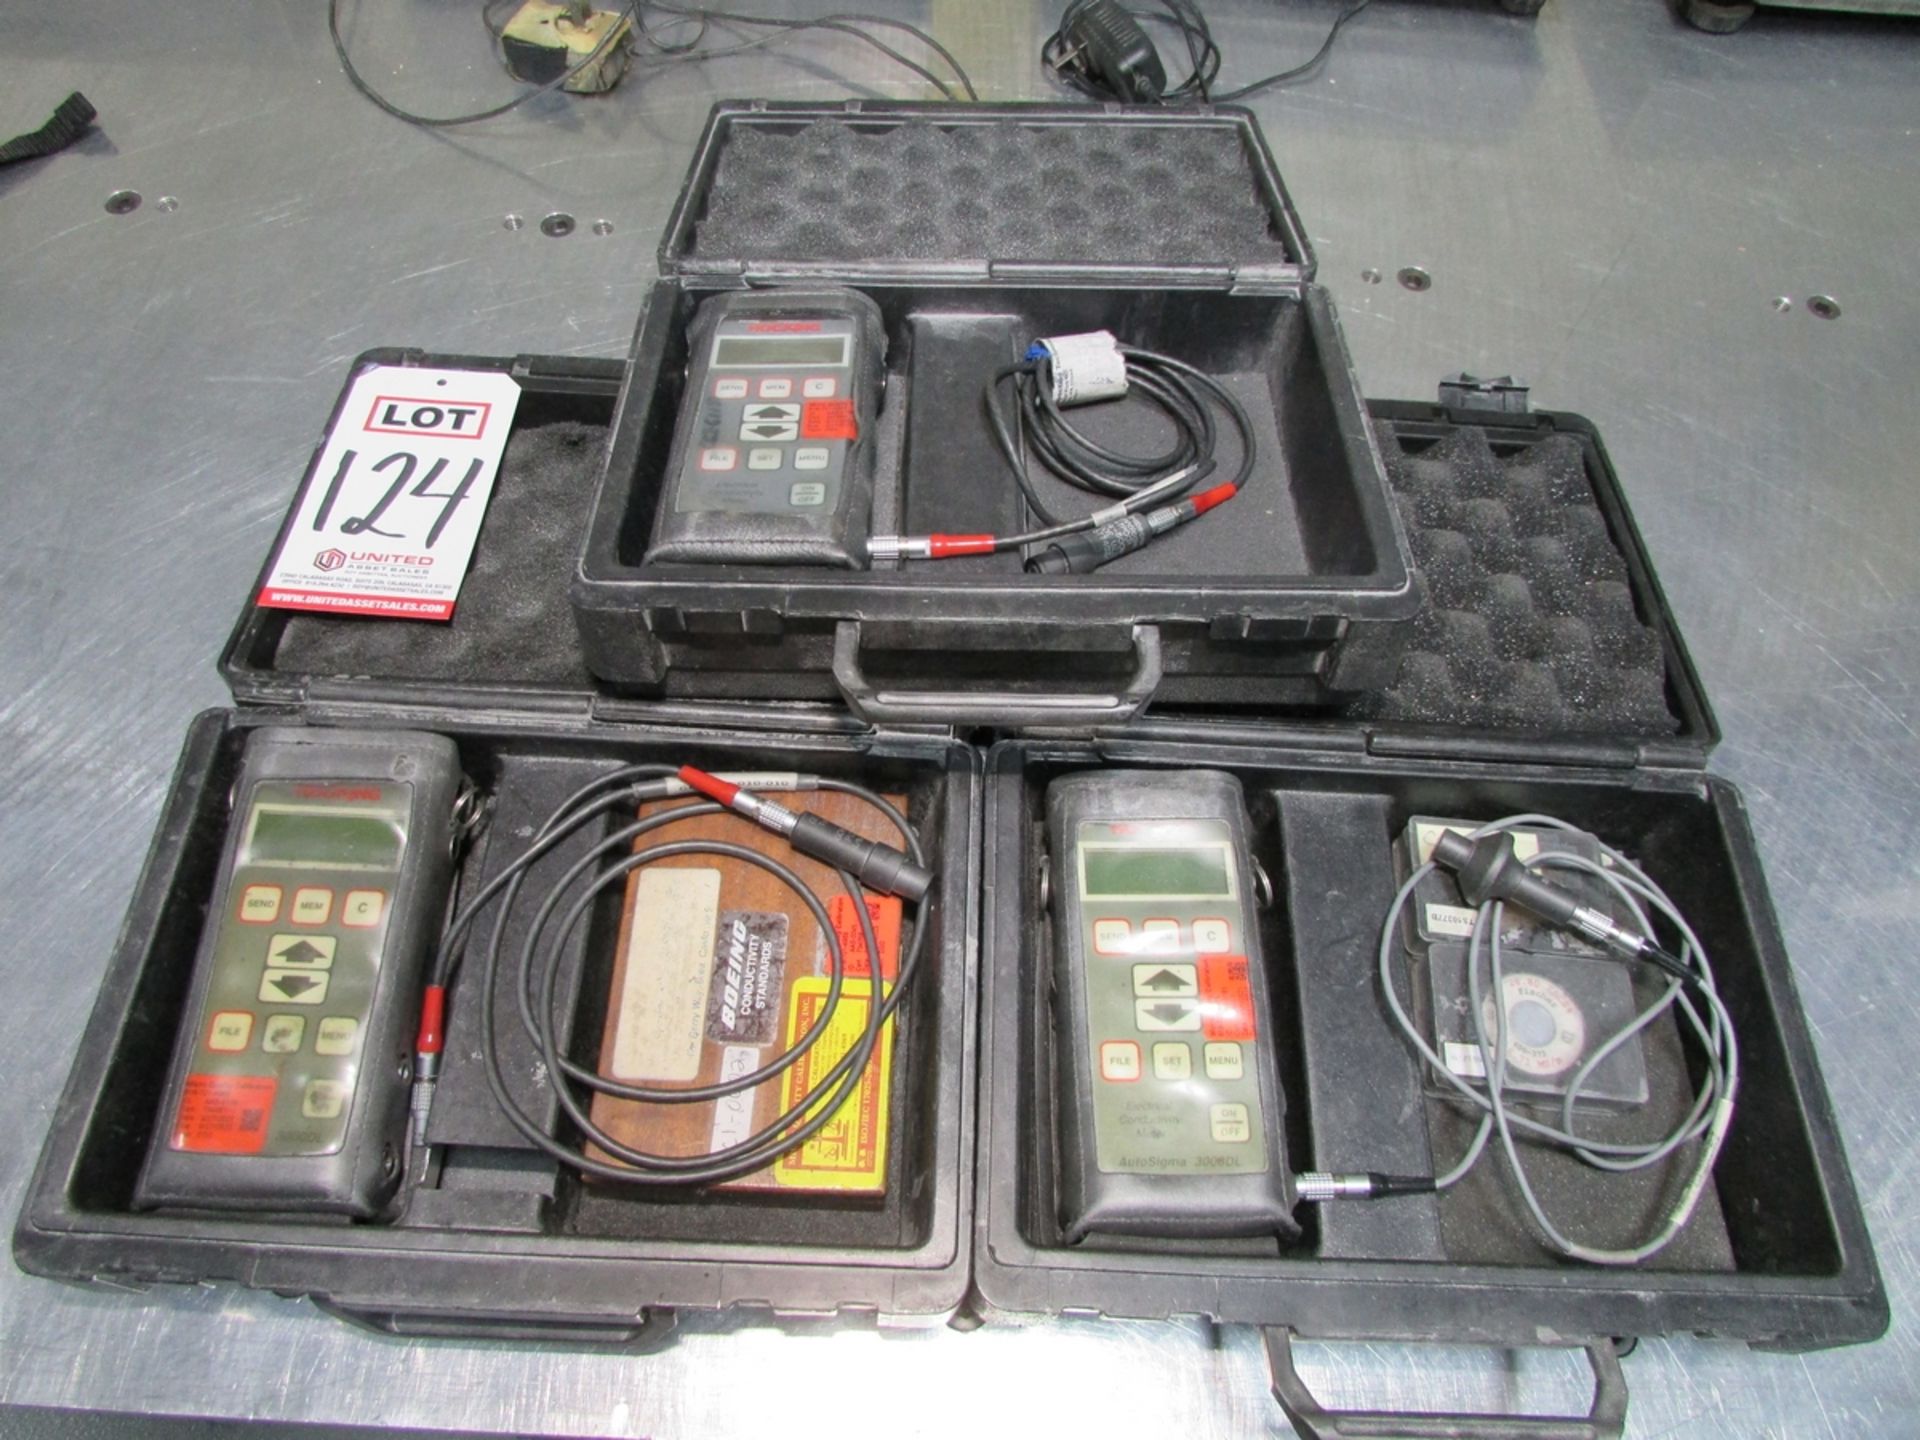 LOT - (3) HOCKING ELECTRICAL CONDUCTIVITY METERS, MODEL AUTOSIGMA 3000DL